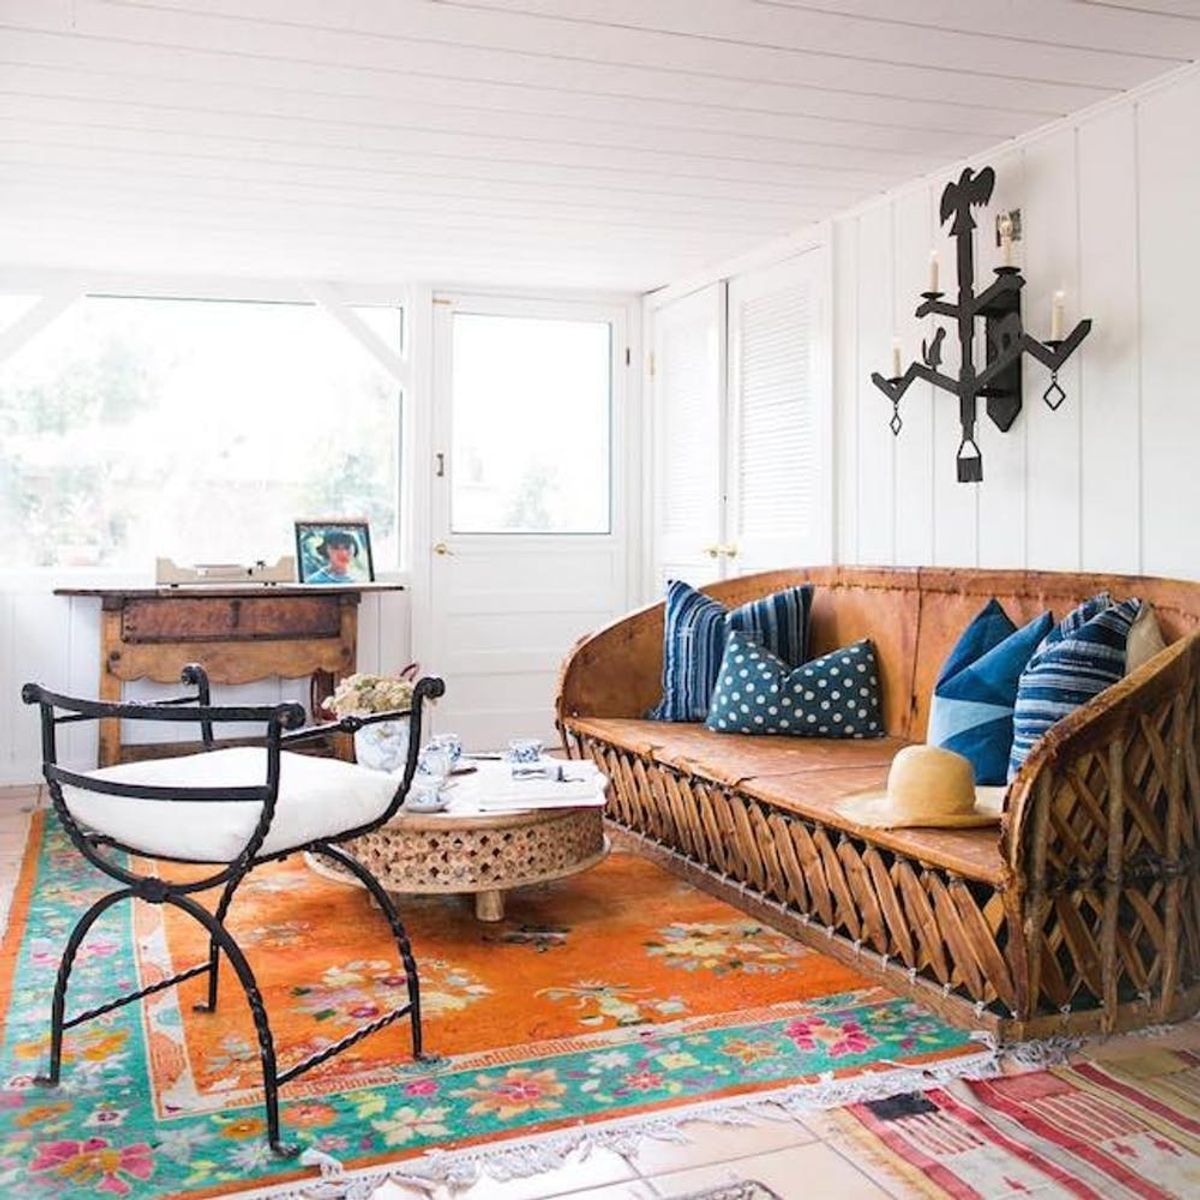 16 Airbnb Instagram Accounts to Follow for Interior #Inspo